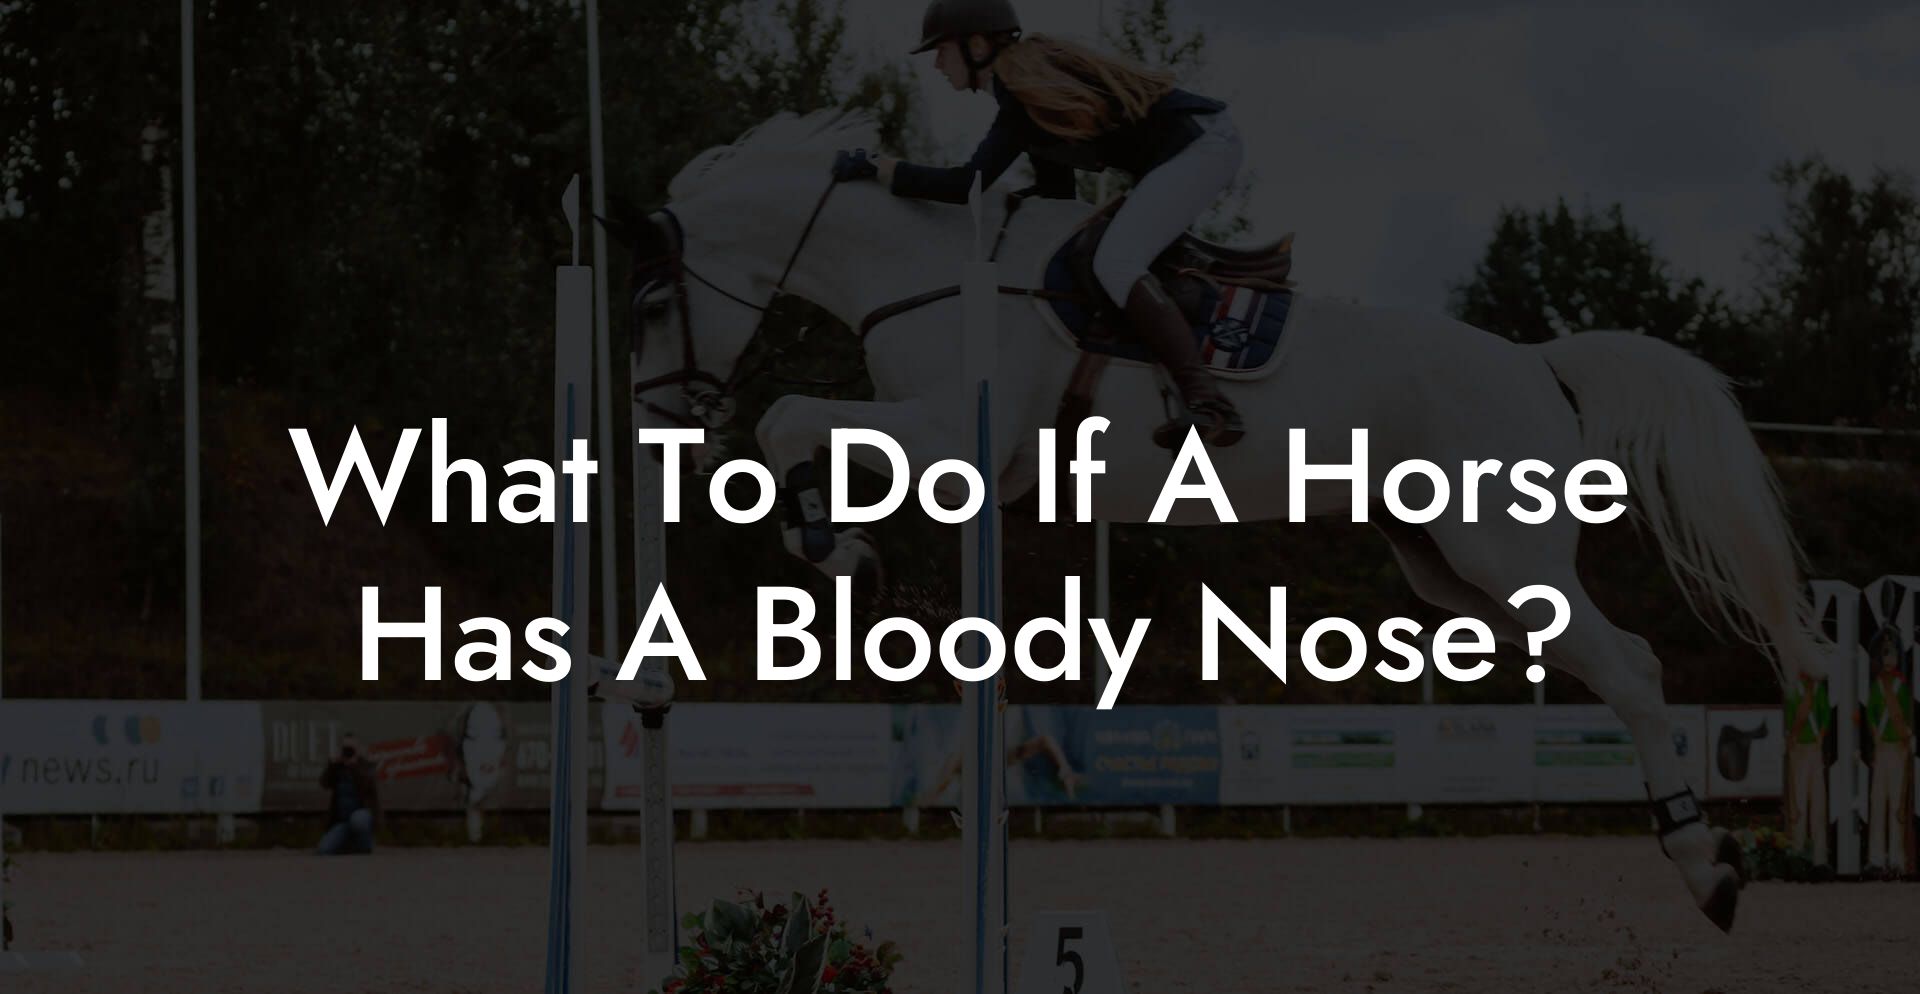 What To Do If A Horse Has A Bloody Nose?